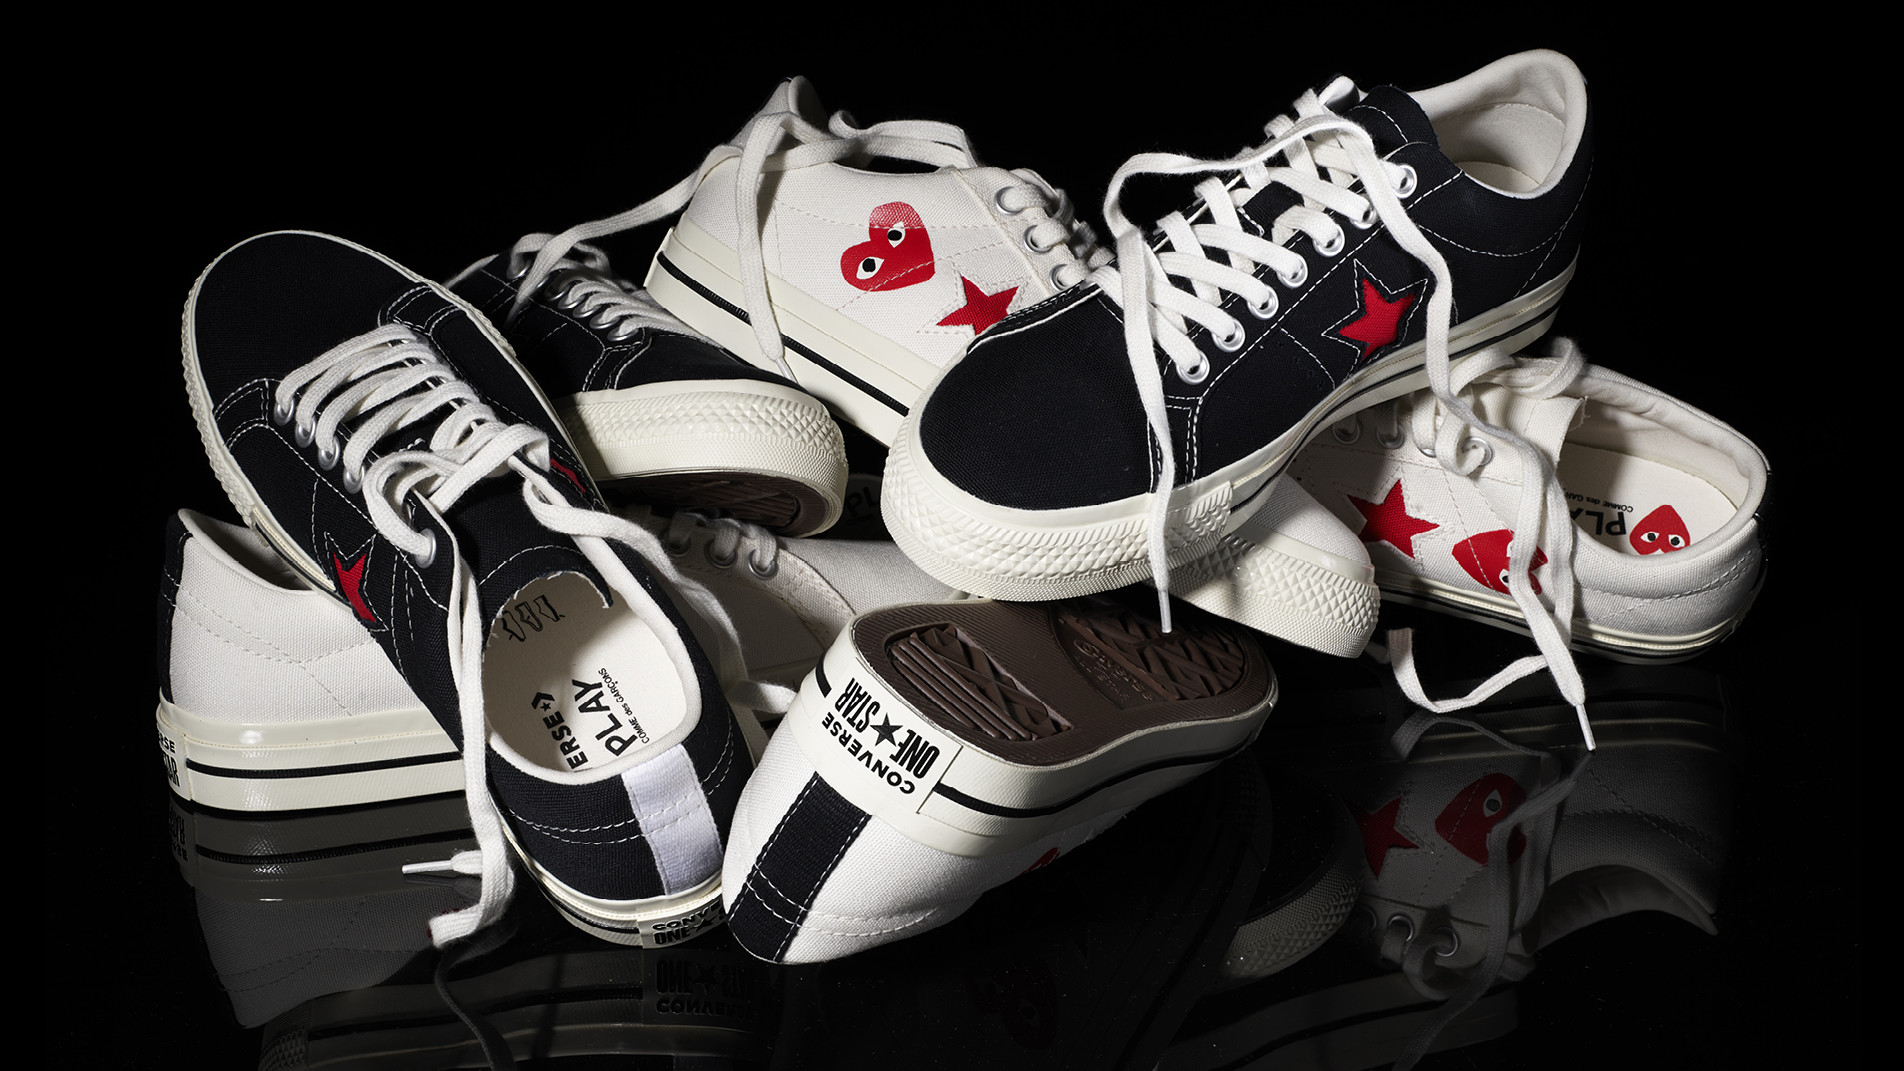 Comme des Garçons and Converse Collab on a New Sneaker | Complex